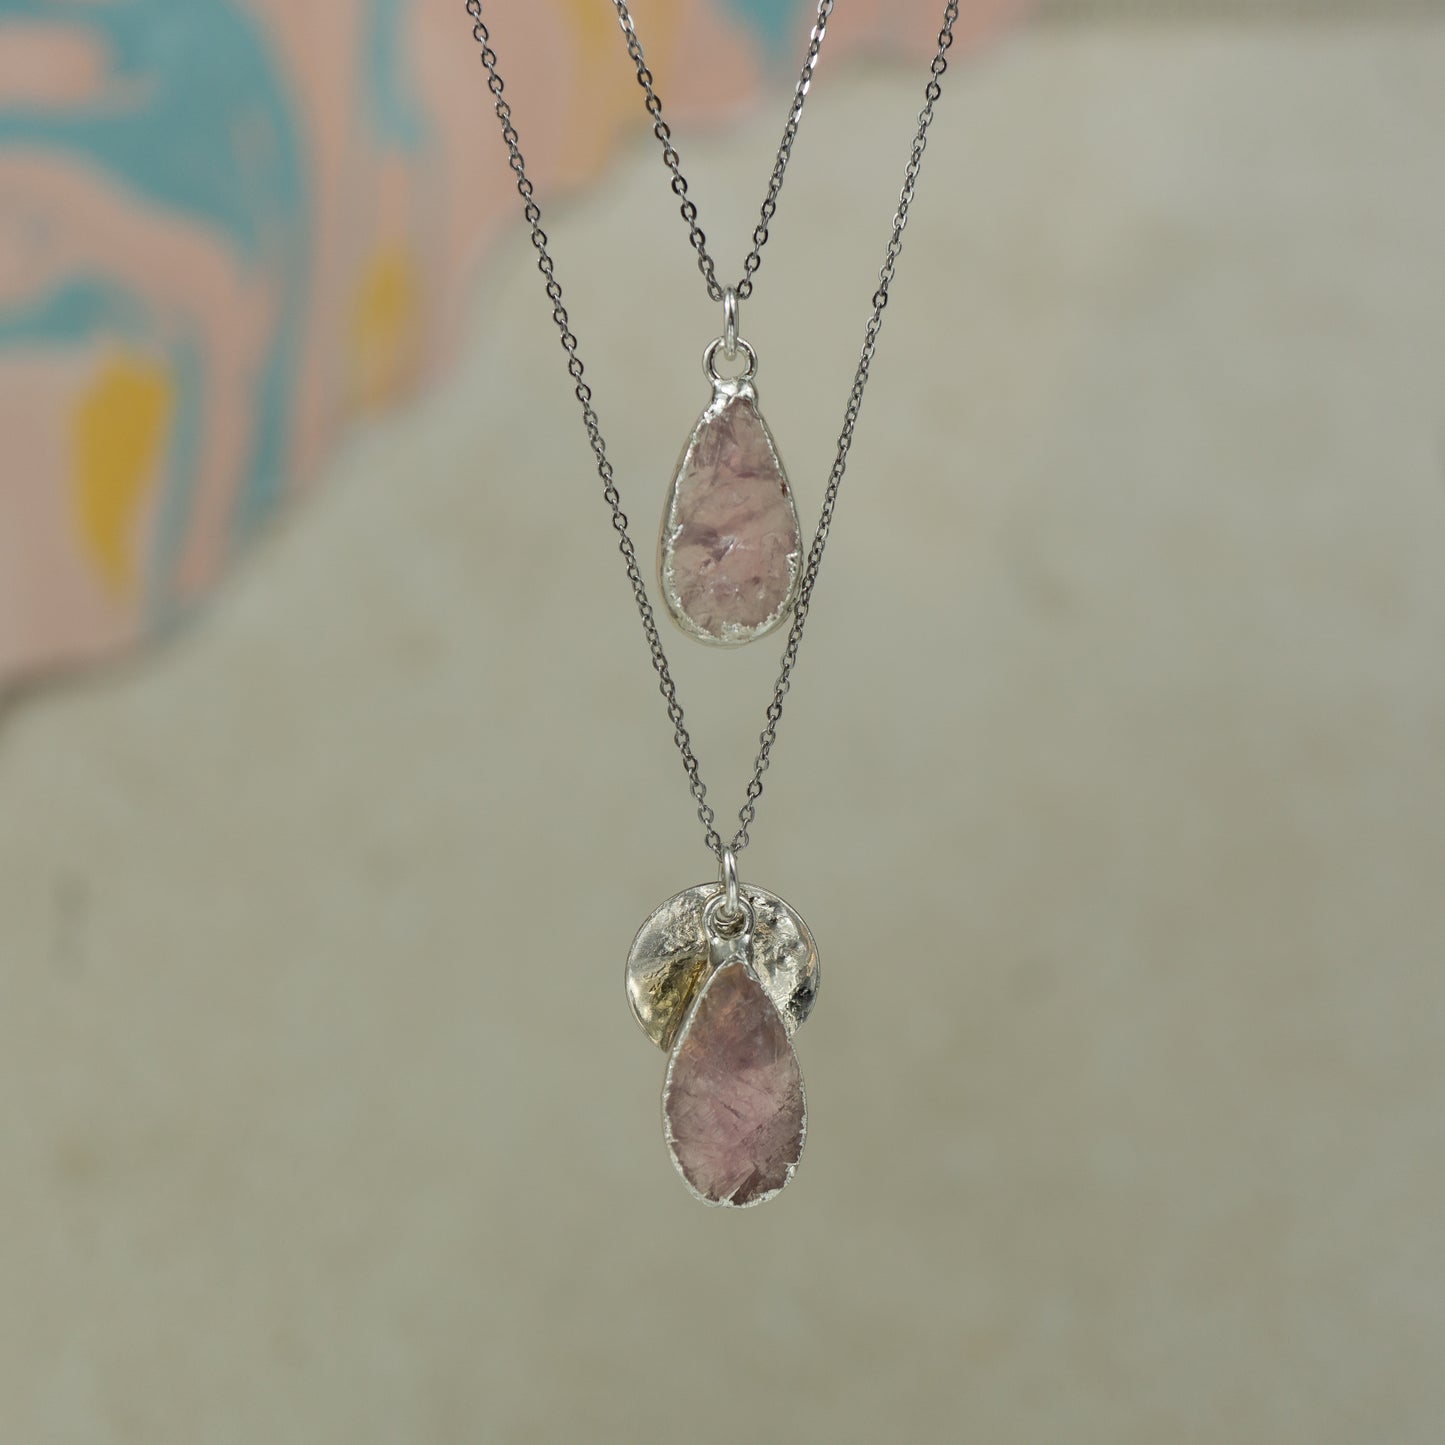 single teardrop pink rose quartz pendants finished in silver on a chains.